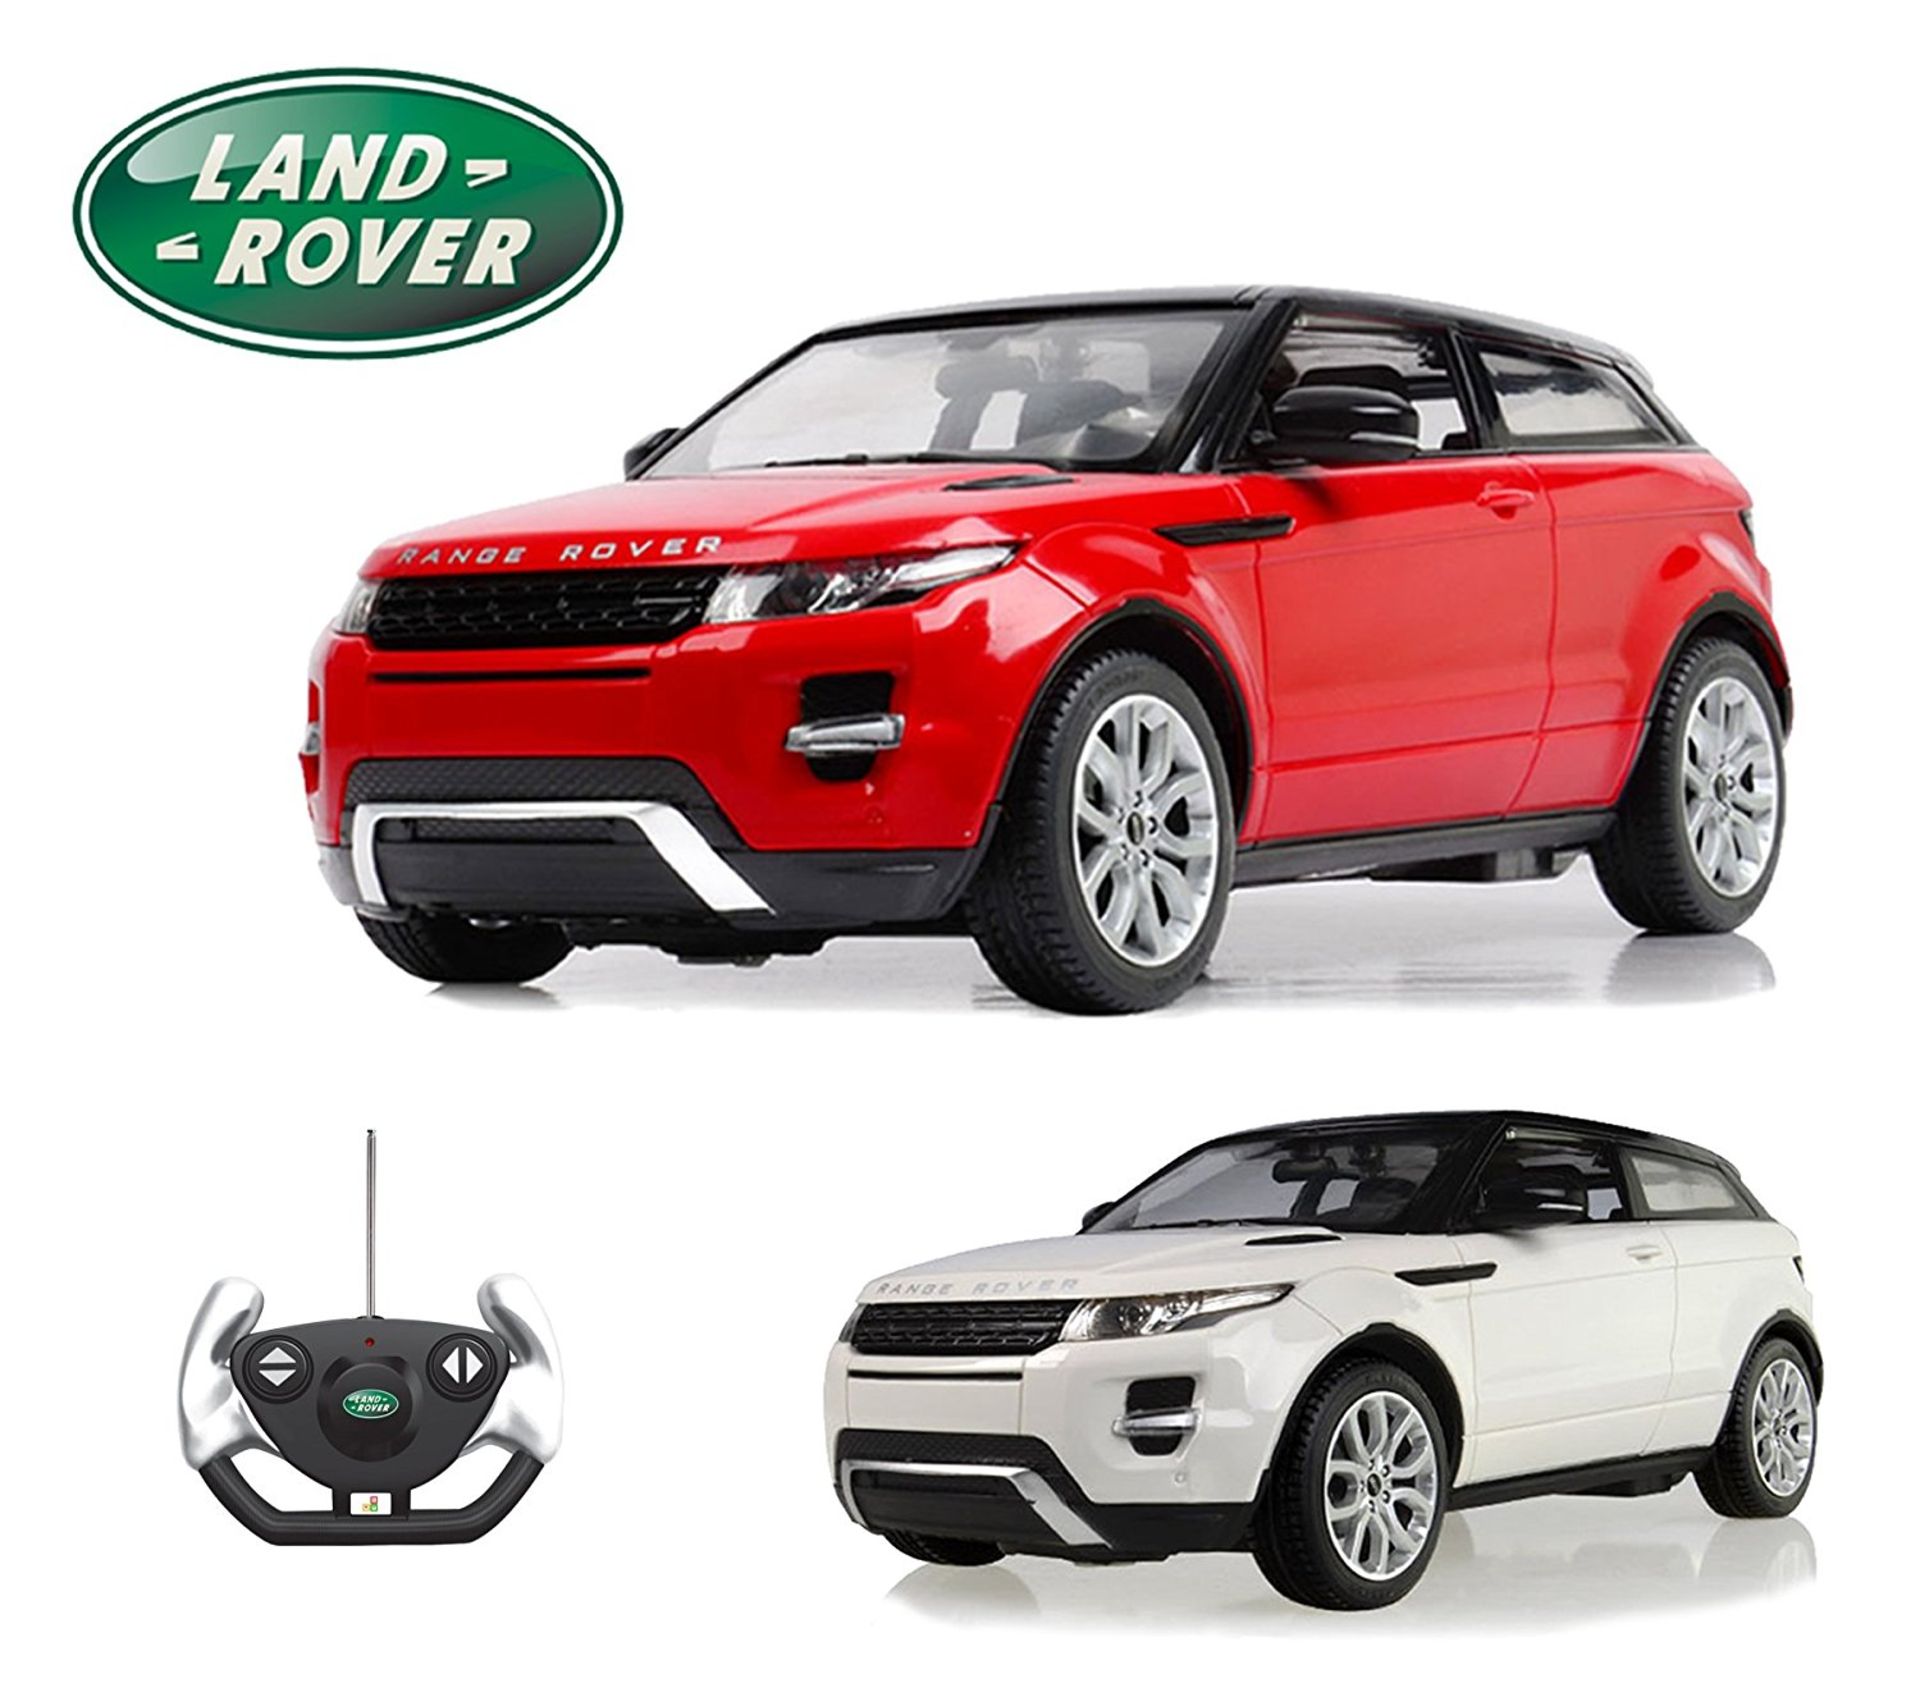 V *TRADE QTY* Brand New R/C 1:14 Scale Range Rover Evoque - Amazon Price £37.00 - Colours May Vary X